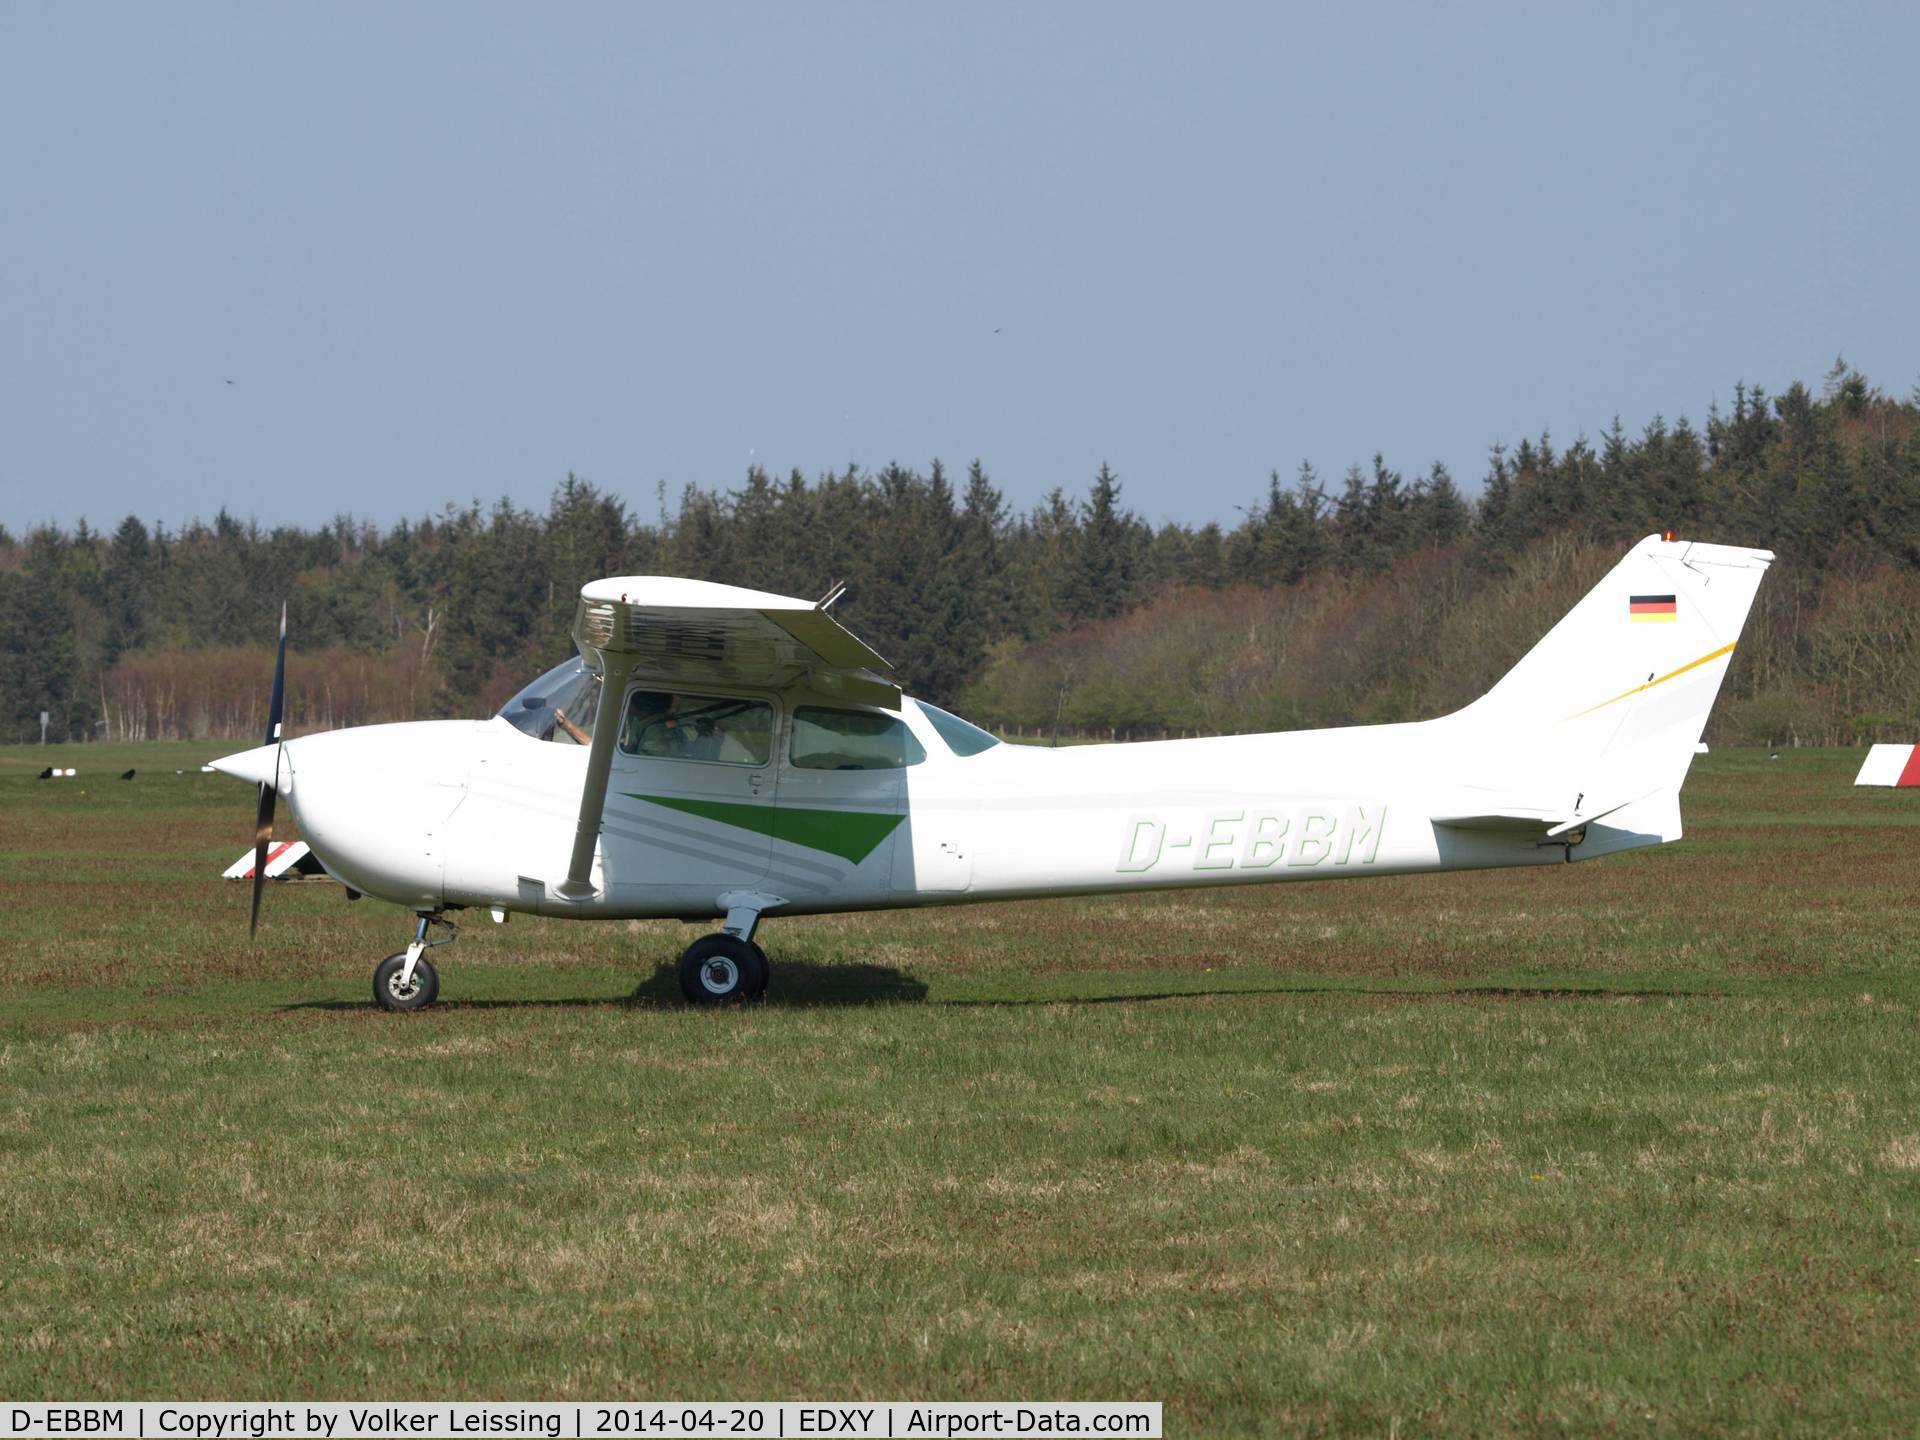 D-EBBM, 1991 Cessna 172M C/N 1728151, taxi to the rwy